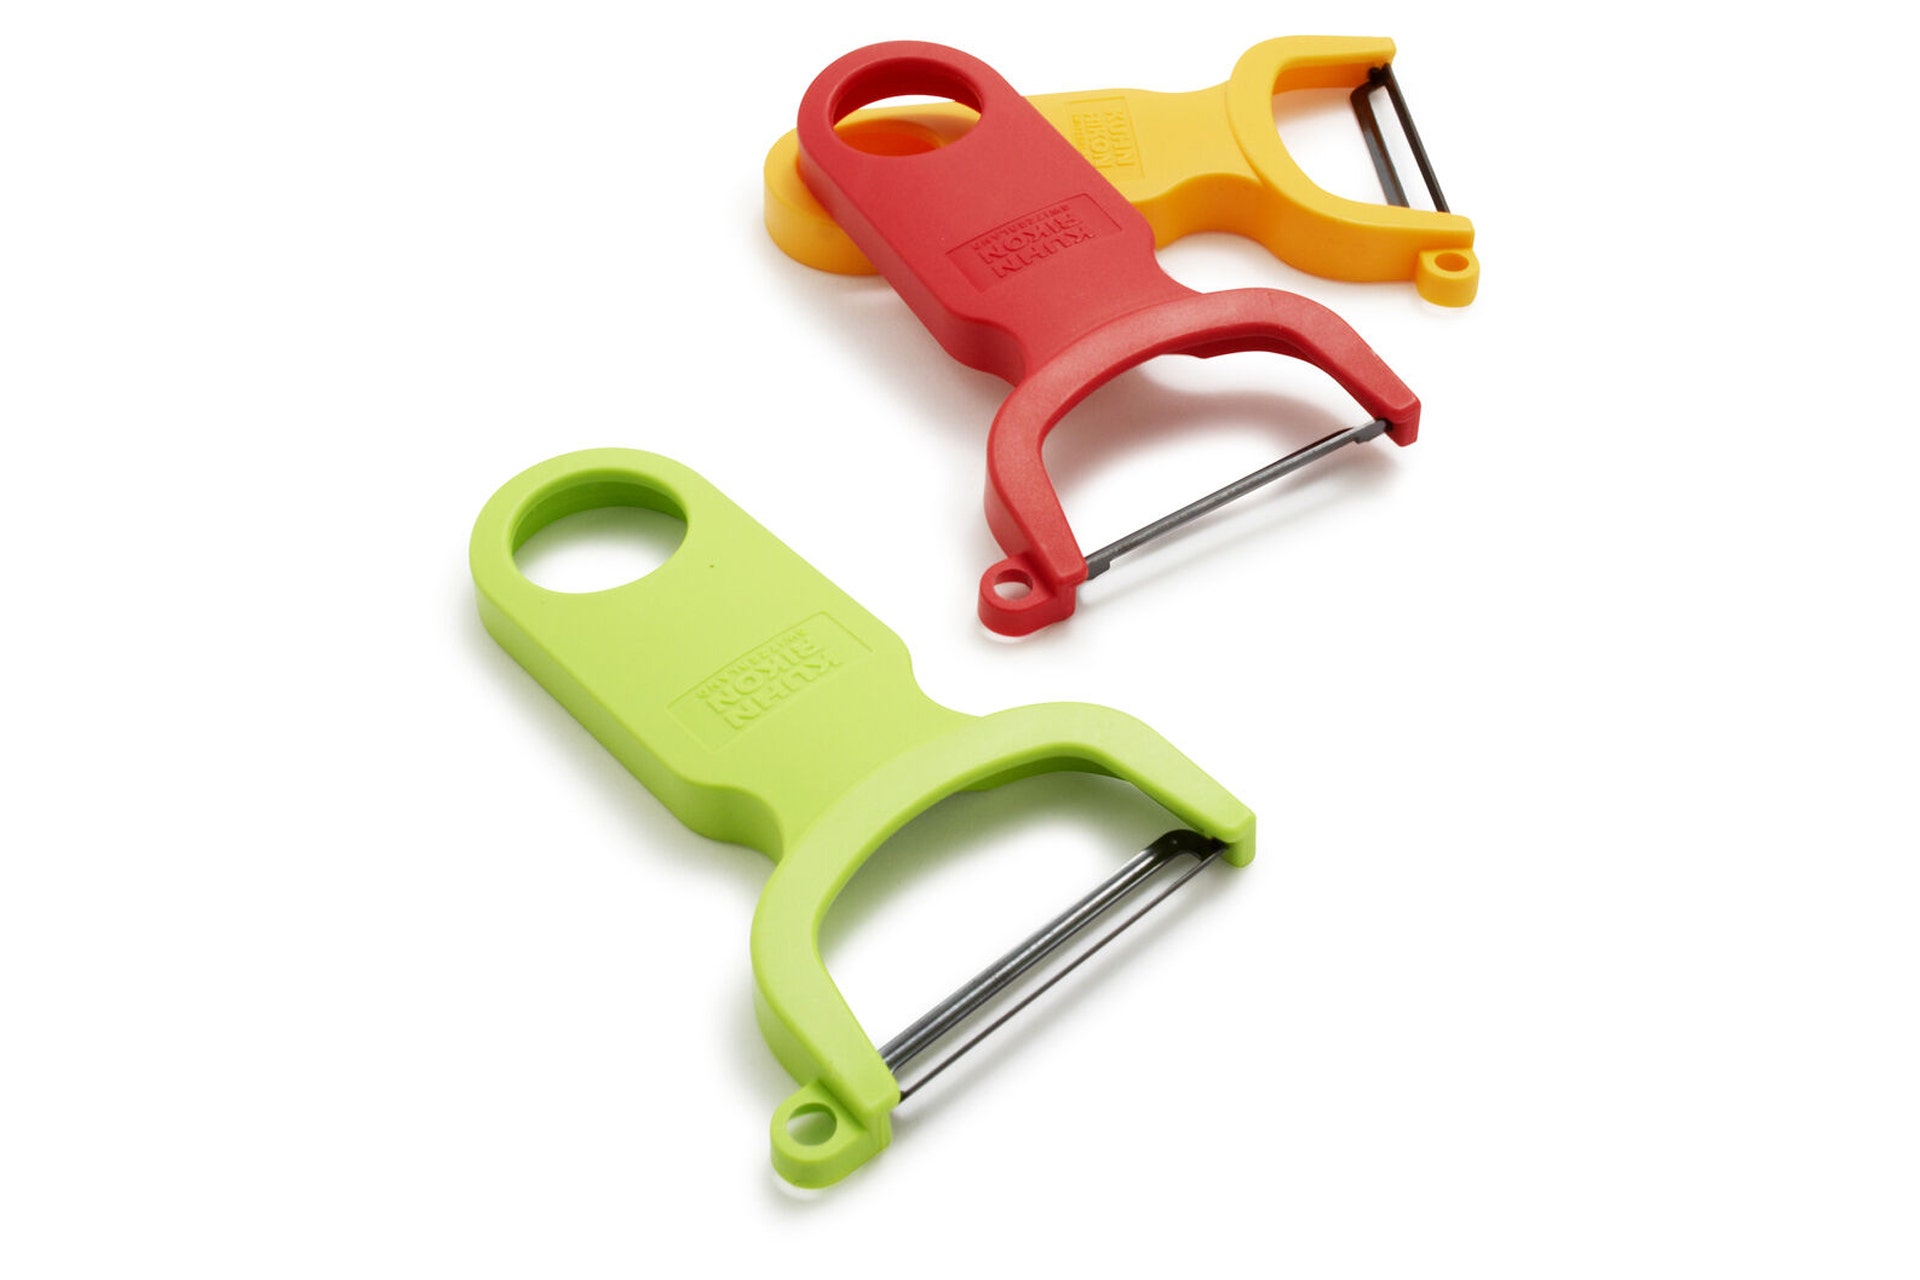 Kuhn Rikon Swiss peeler is one of the best peelers for cocktails